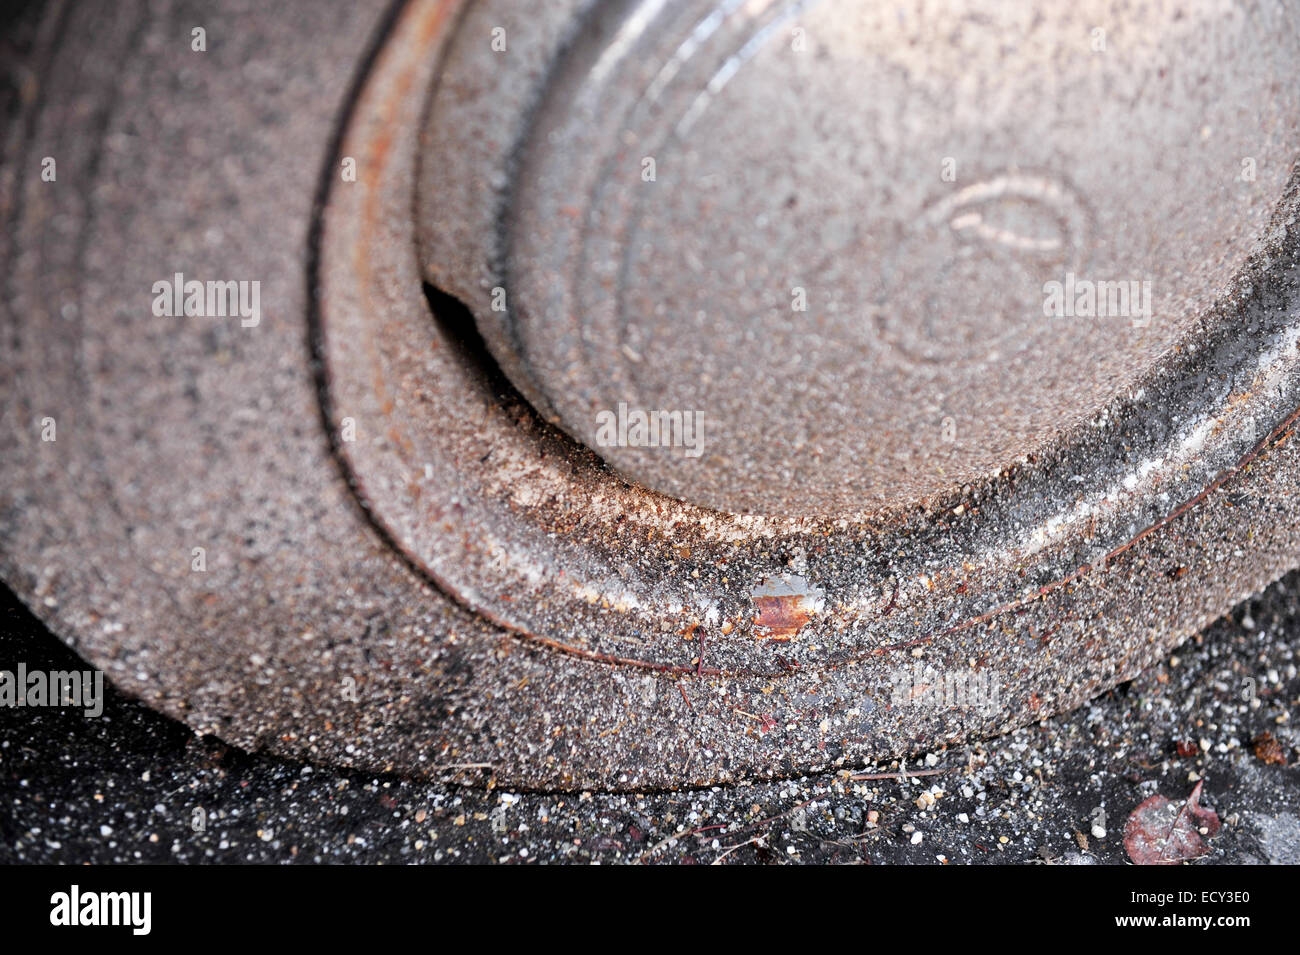 Abandoned car detail with a rusty rim and a flat tire Stock Photo